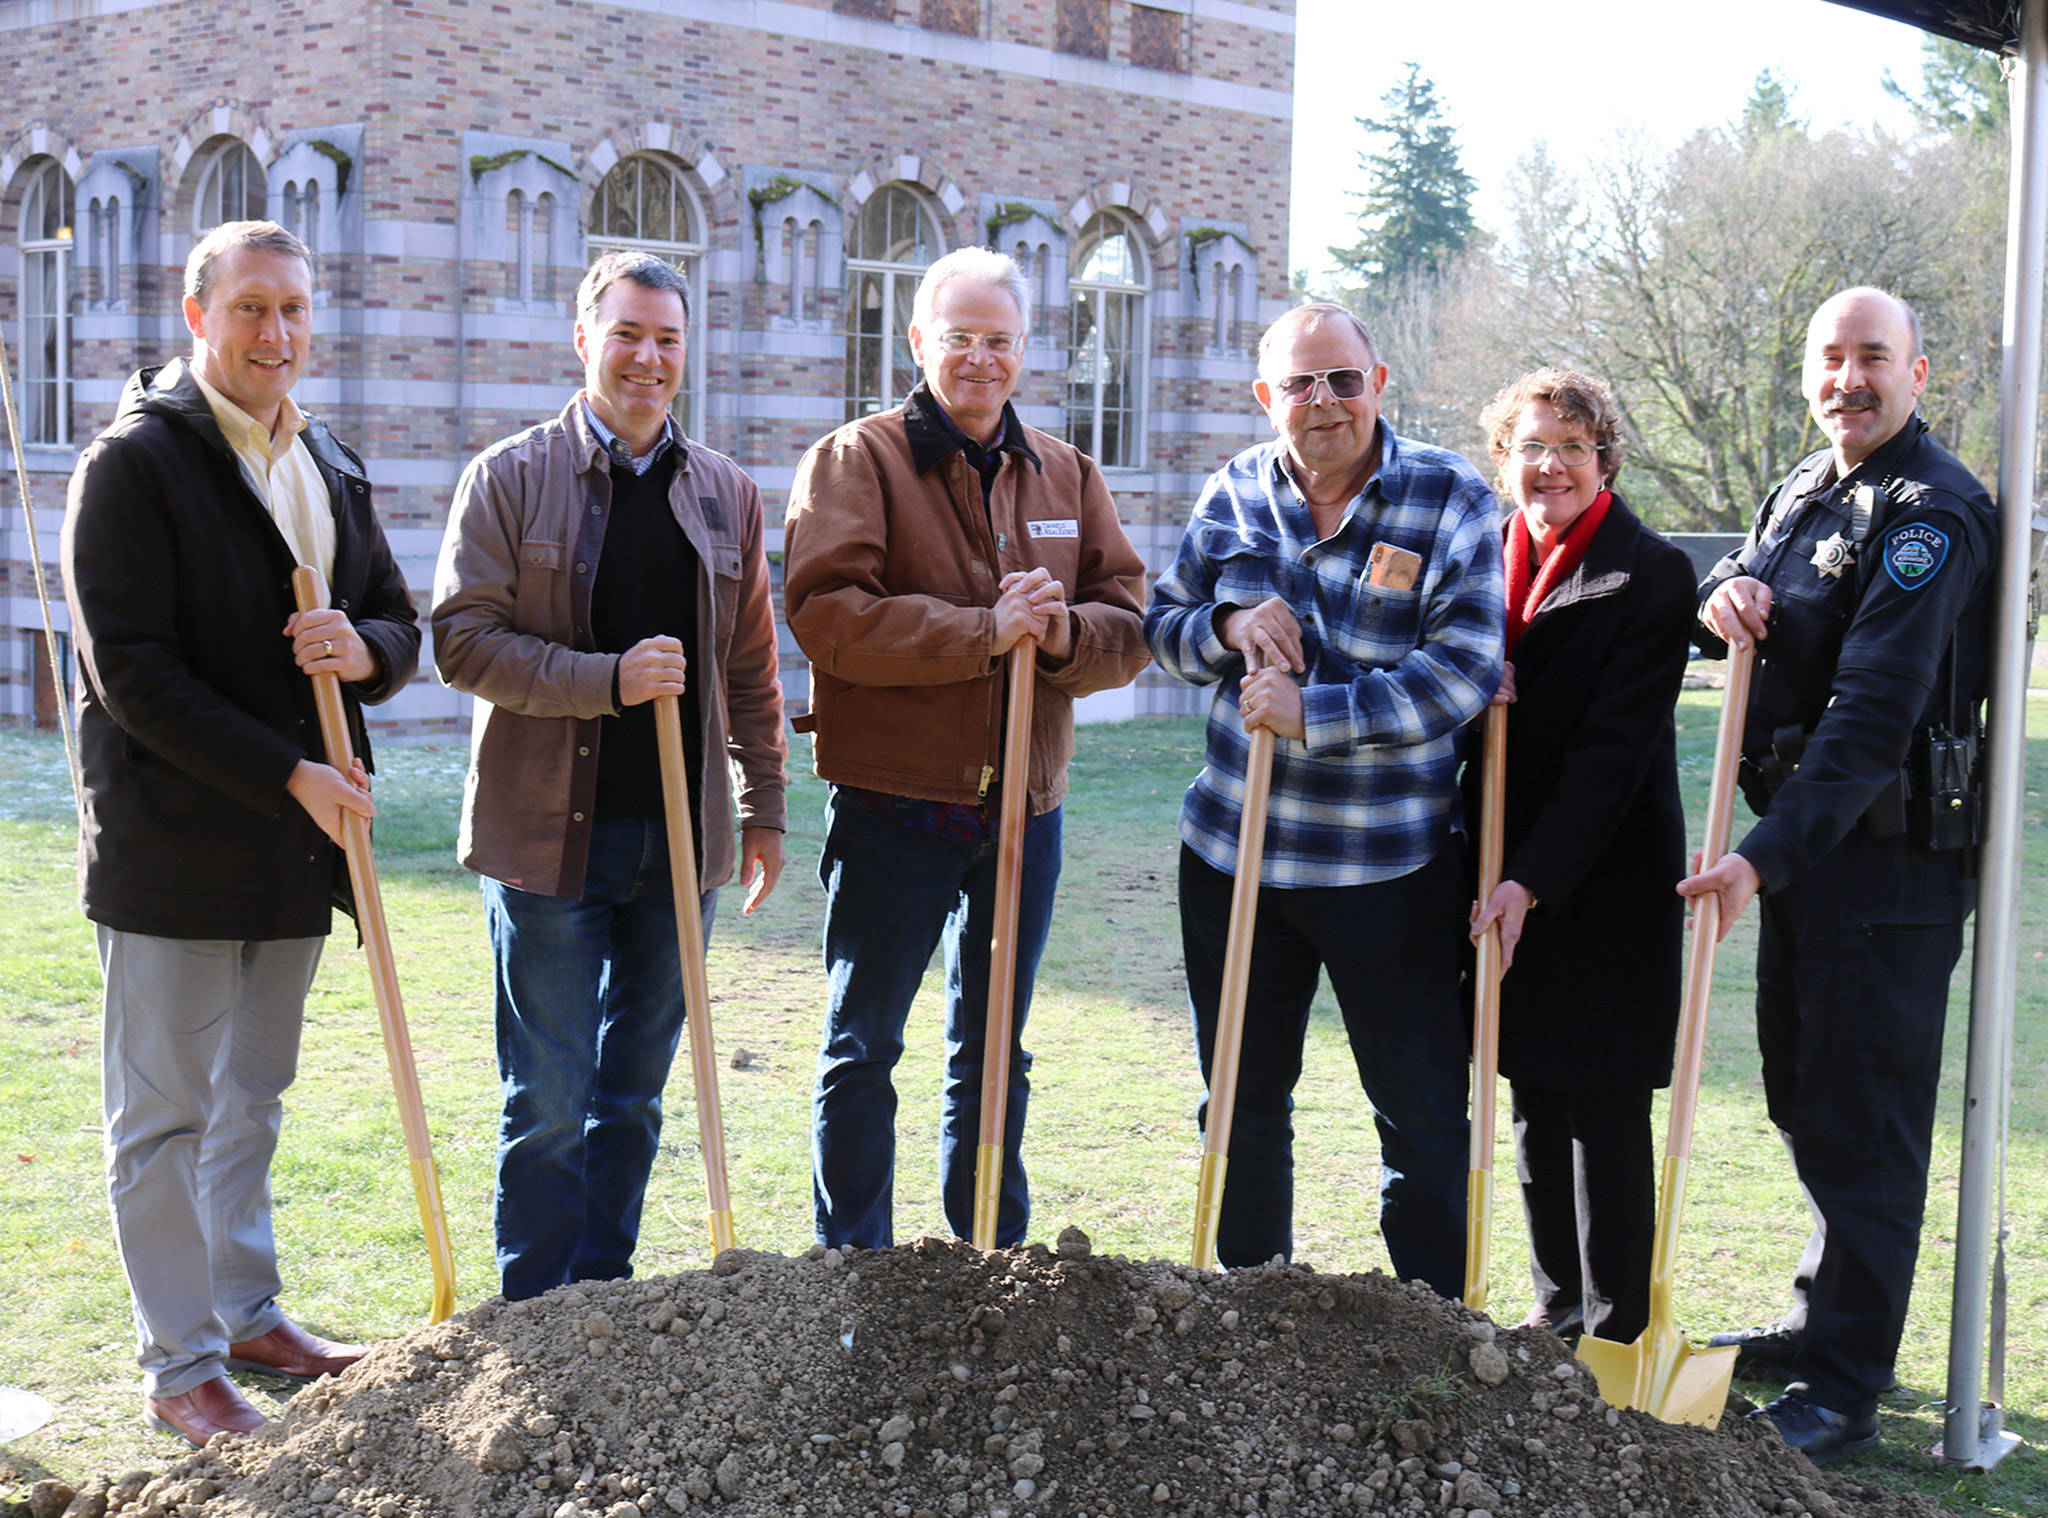 Kenmore city staff, including City Manager Rob Karlinsey, Assistant City Manager Nancy Ousley, Police Chief Peter Horvath, smile with Kevin Daniels and Mayor David Baker at the ceremonial groundbreaking for the Lodge at Saint Edward Park on Dec. 7. Katie Metzger/staff photo